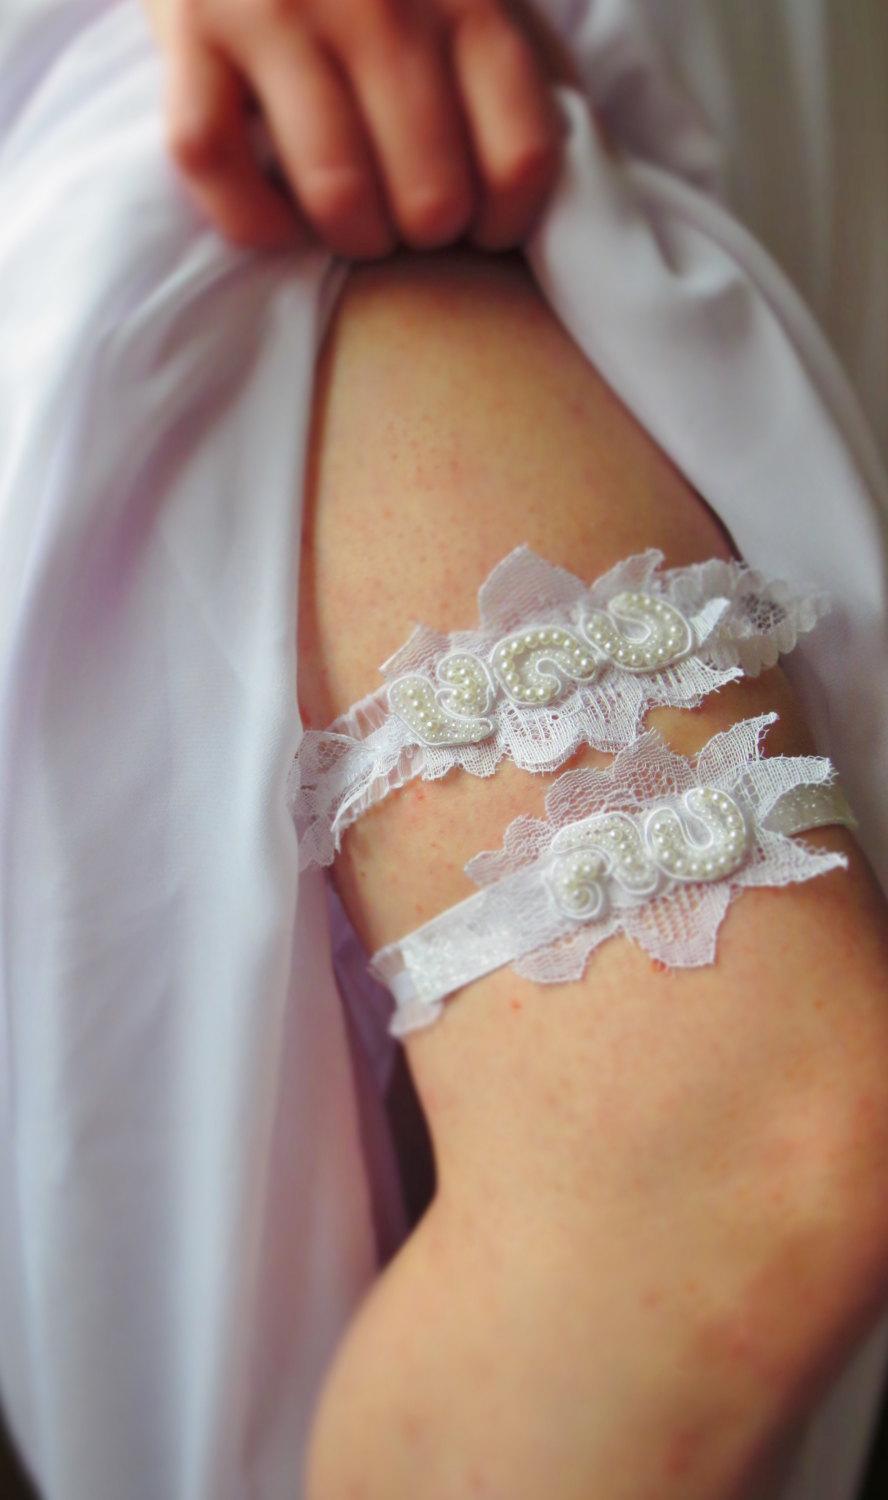 Mariage - Simple White Pearl, Lace and Ruffle Wedding Garter set- Keepsake and Toss away White ruffle garters w/ floral lace applique and pearl accent